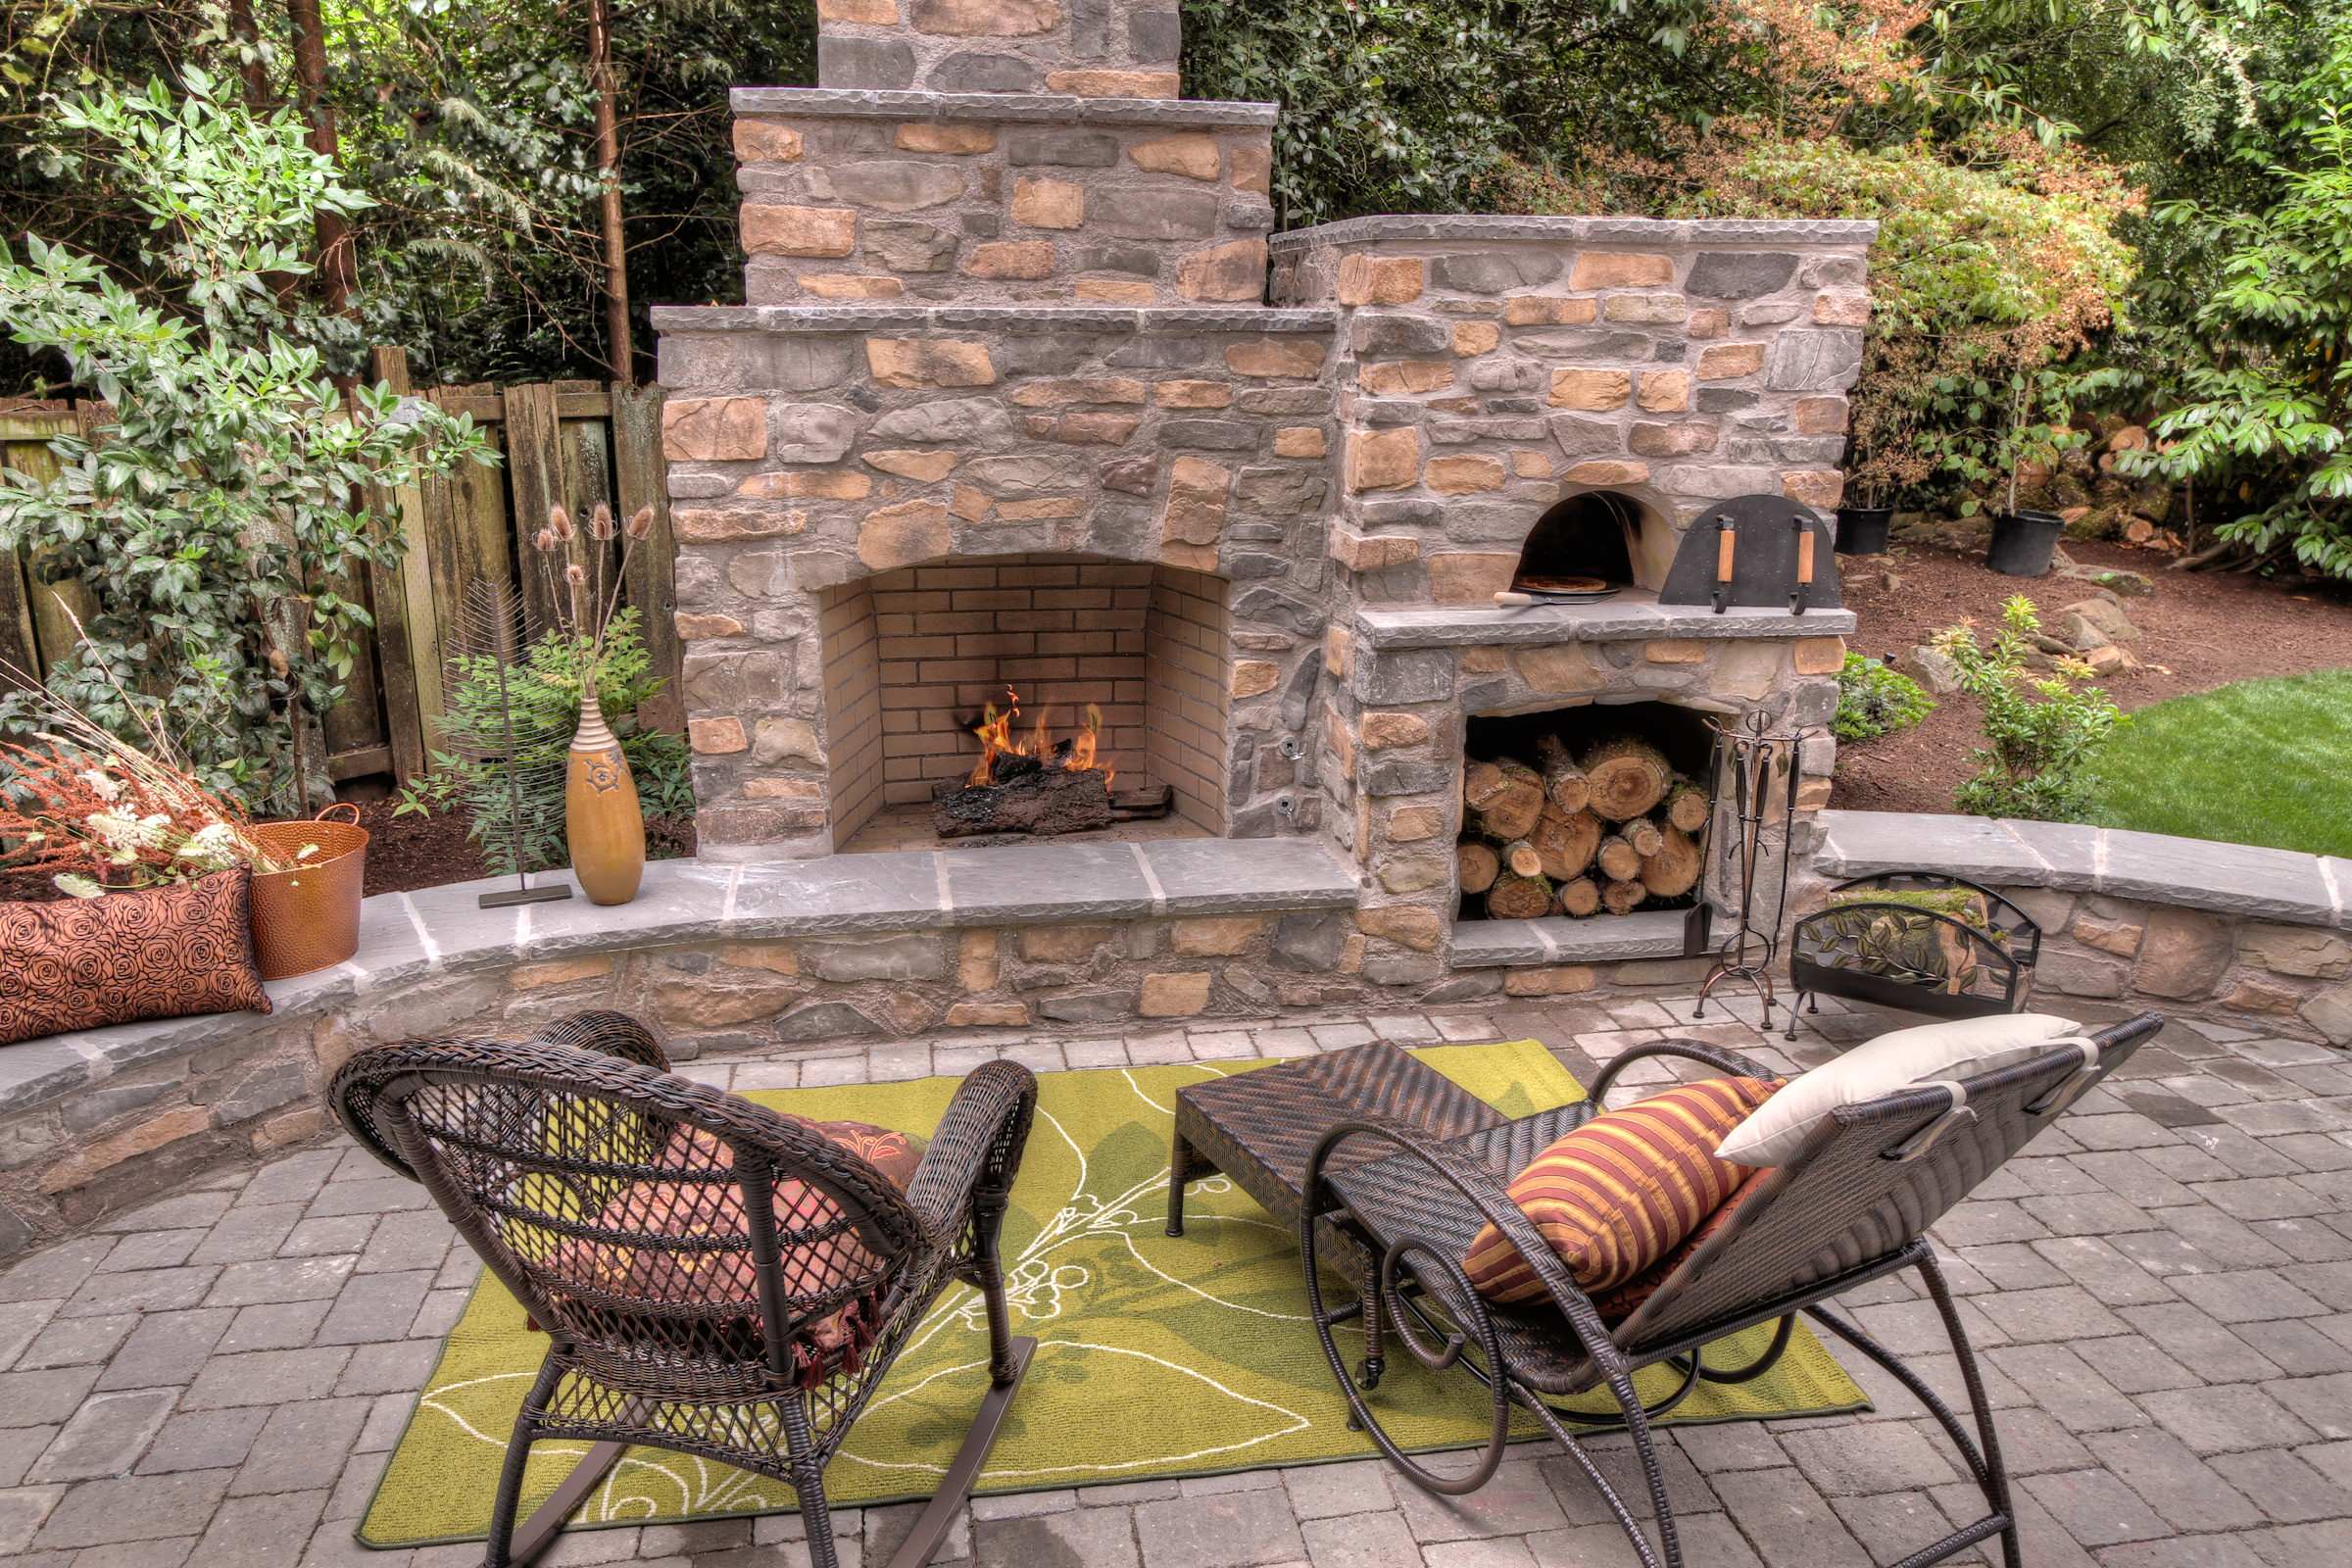 Outdoor Fireplace And Pizza Oven Houzz, Outdoor Fireplace Pizza Oven Smoker